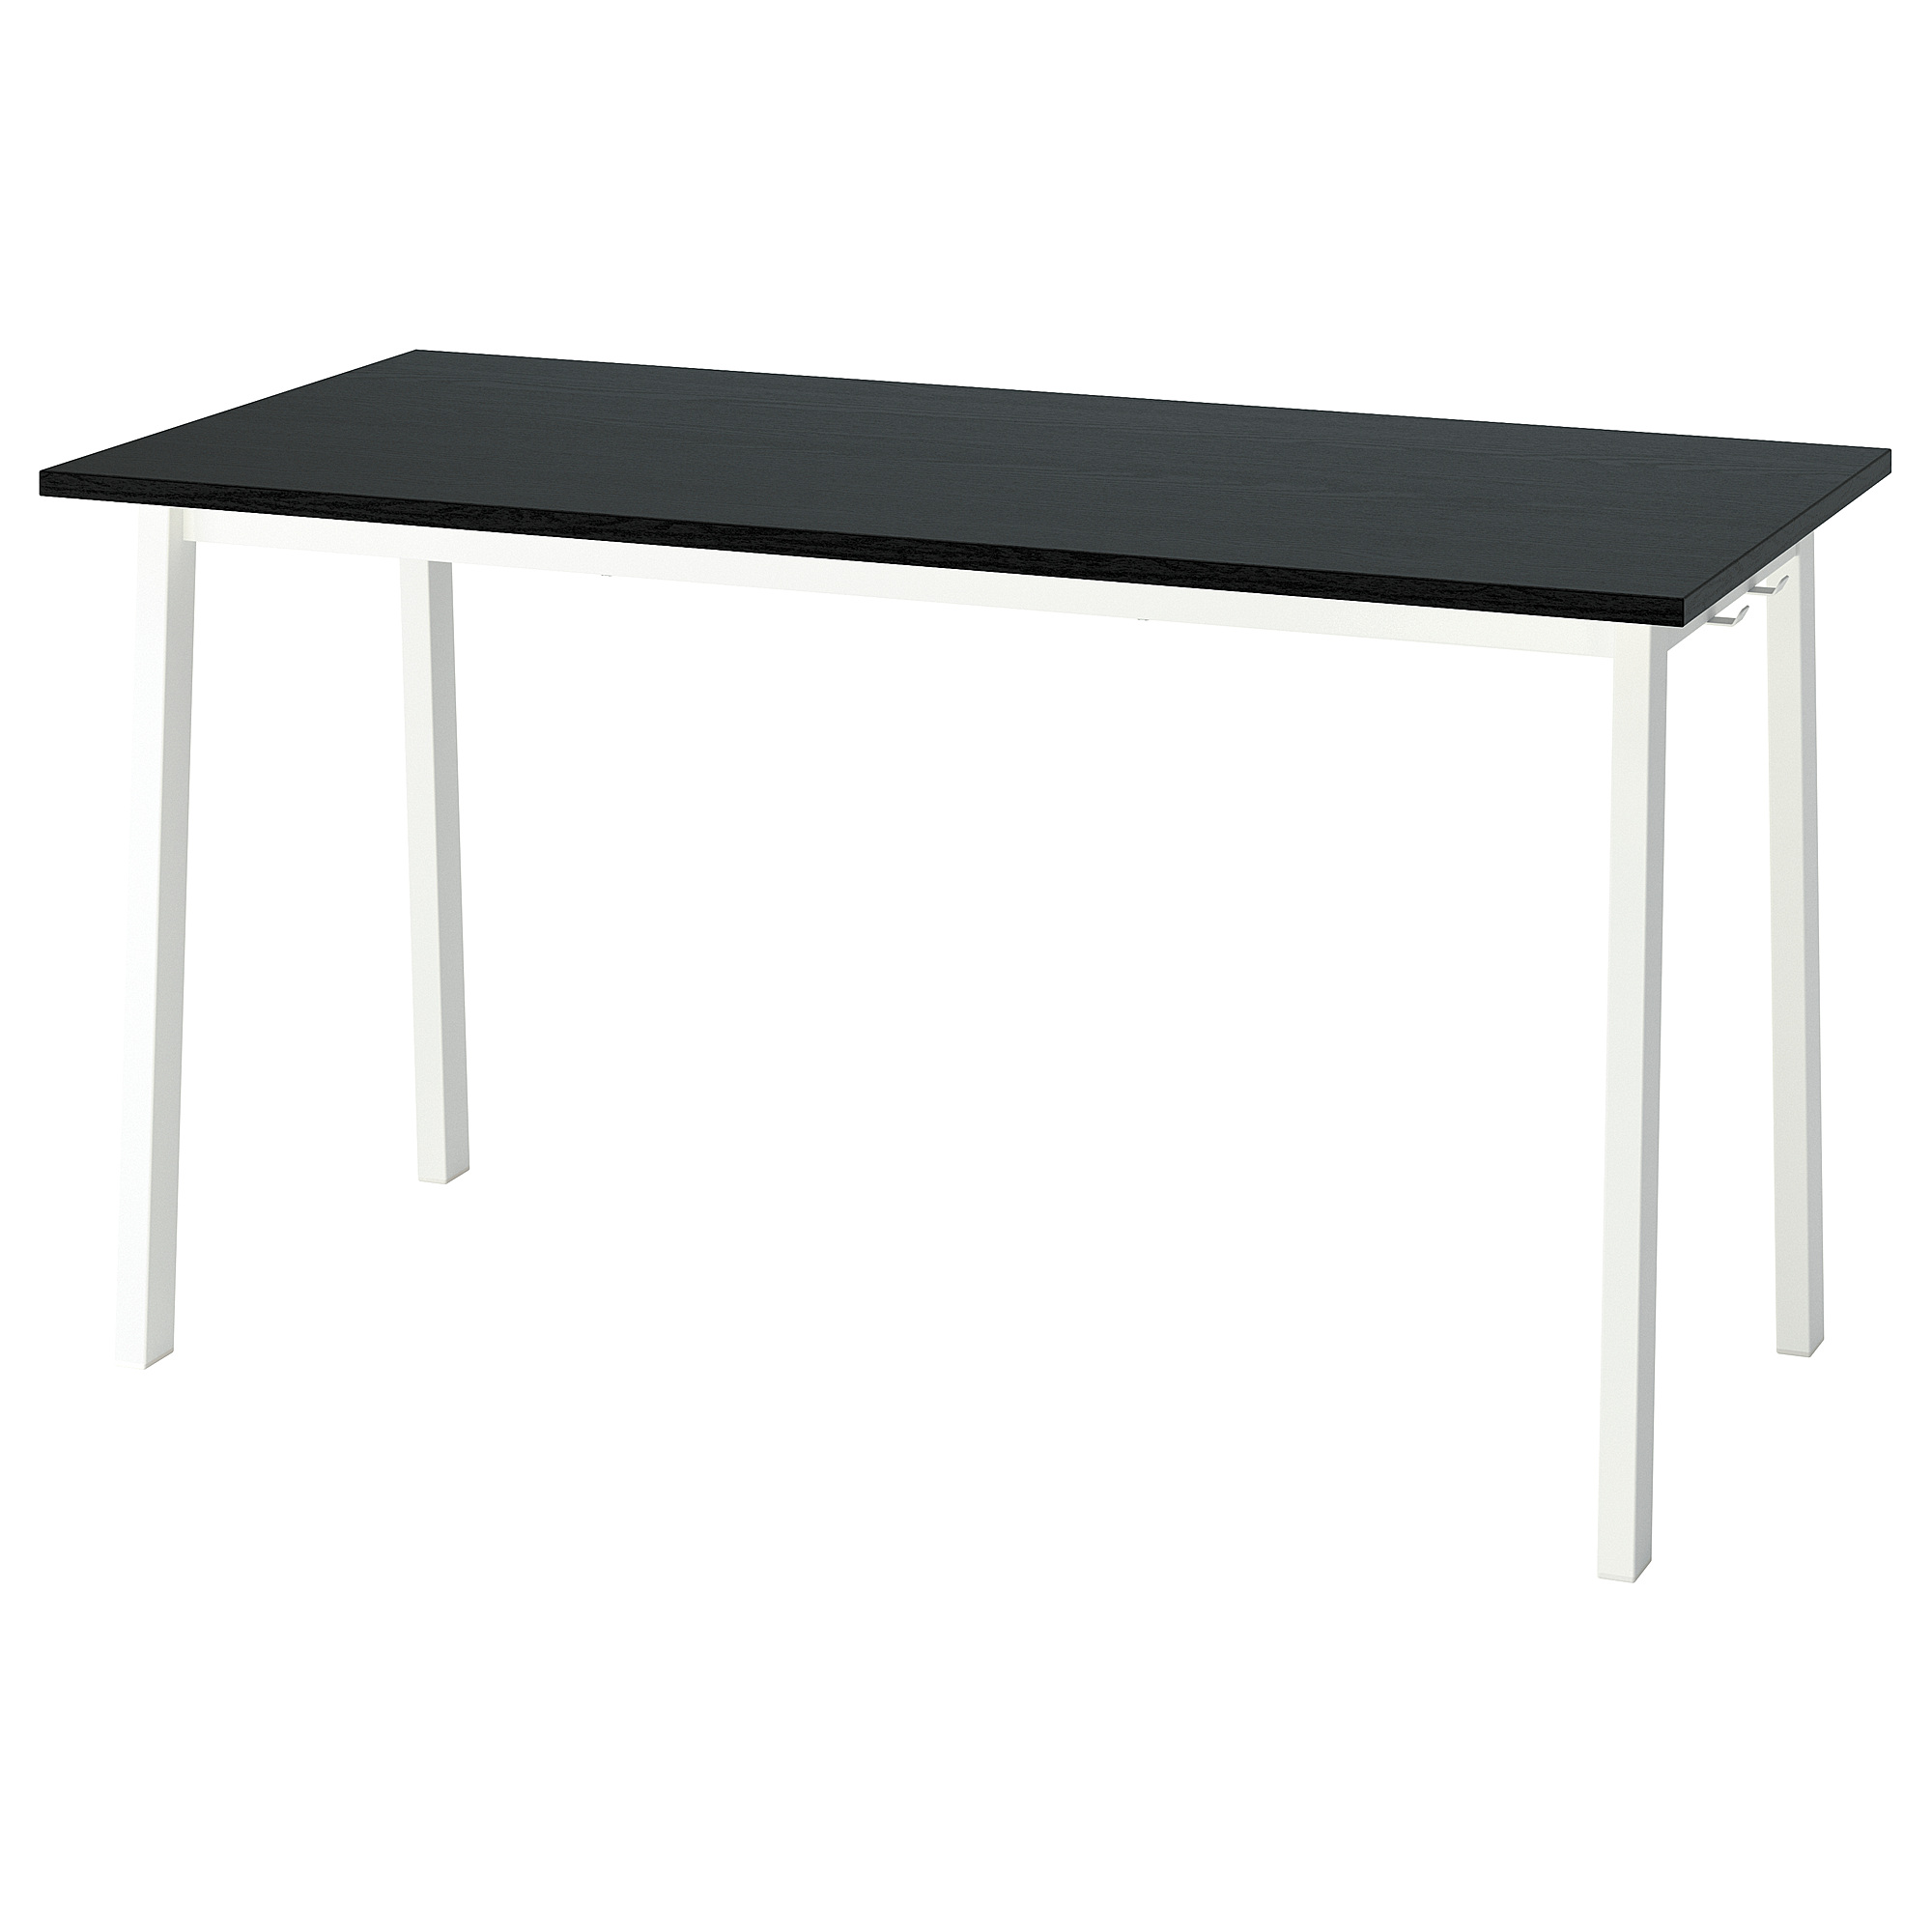 MITTZON conference table